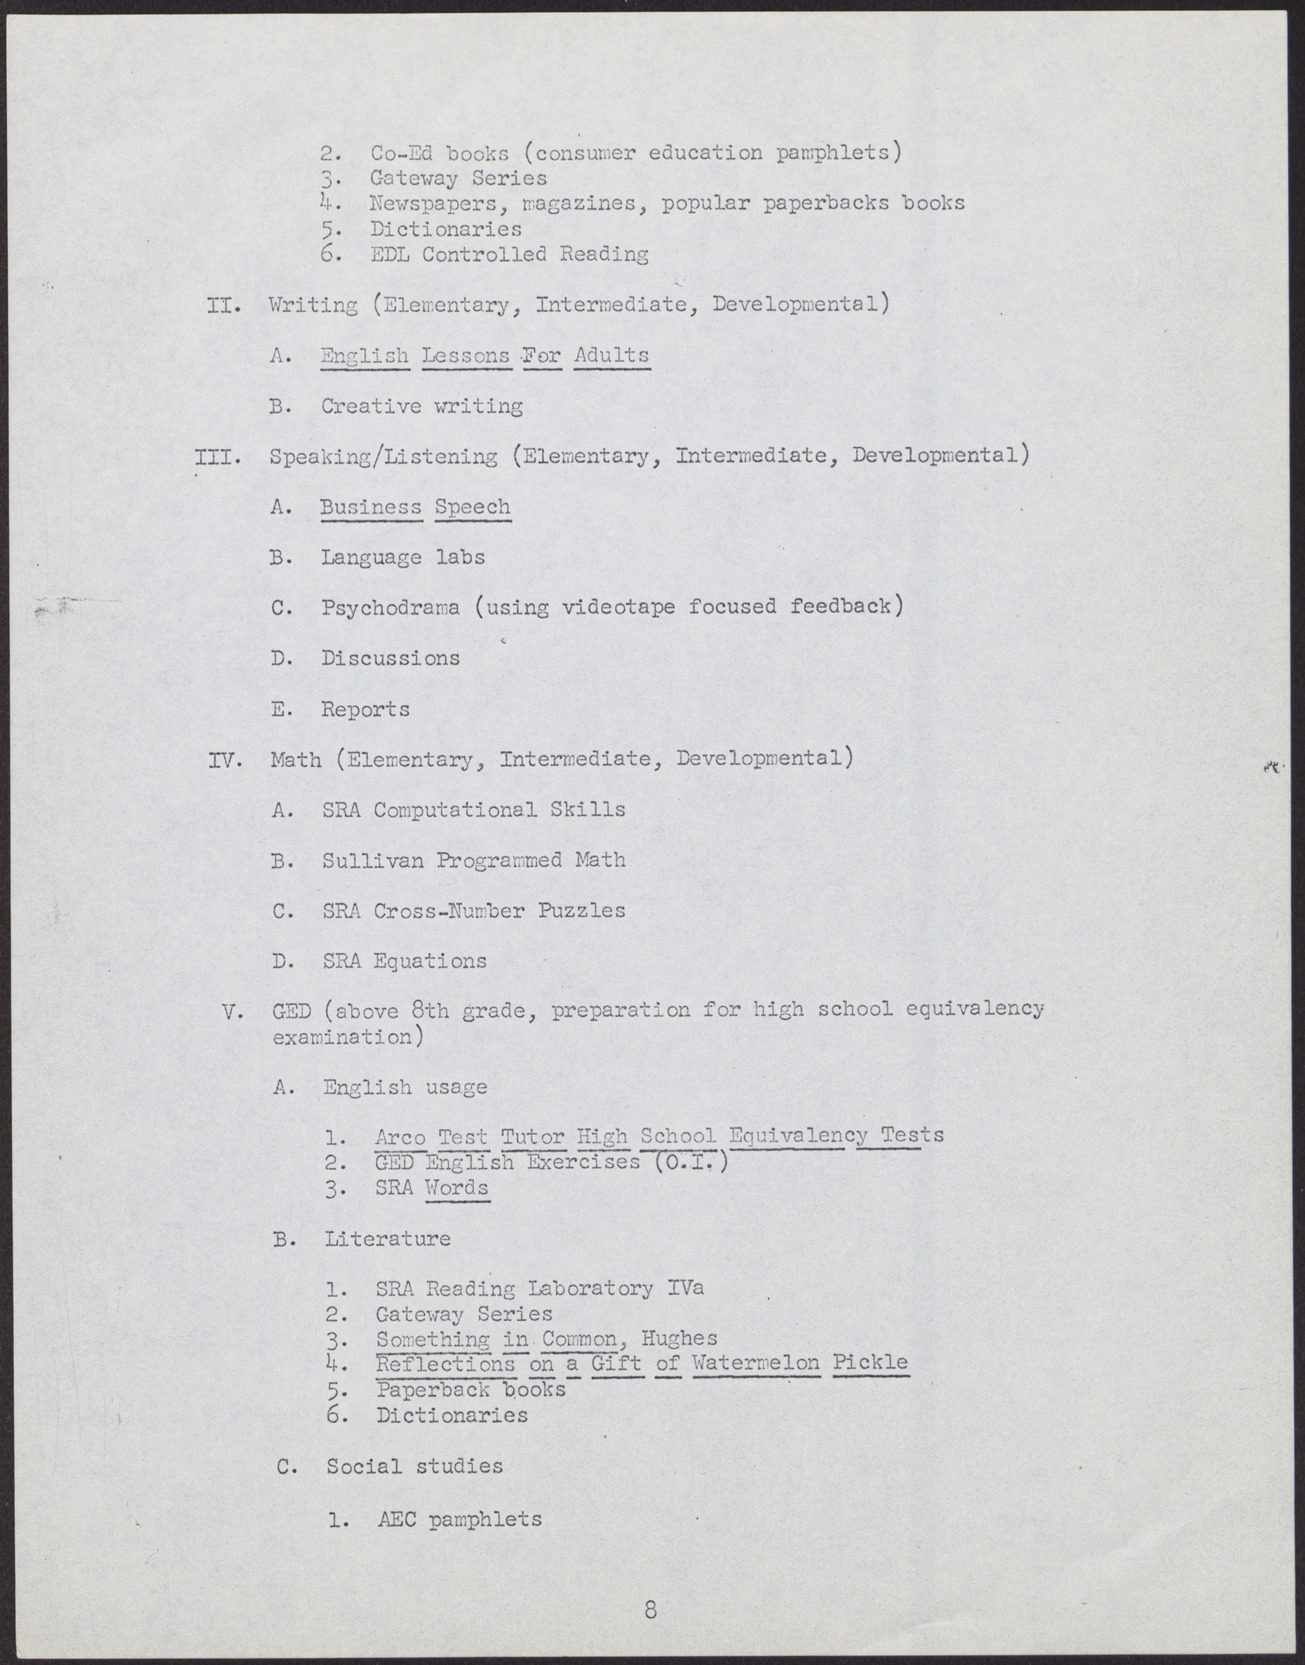 Proposal to the Clark County, Nevada Concentrated Employment Program (21 pages, missing some pages/sections listed in its table of contents), July 2, 1968, page 12